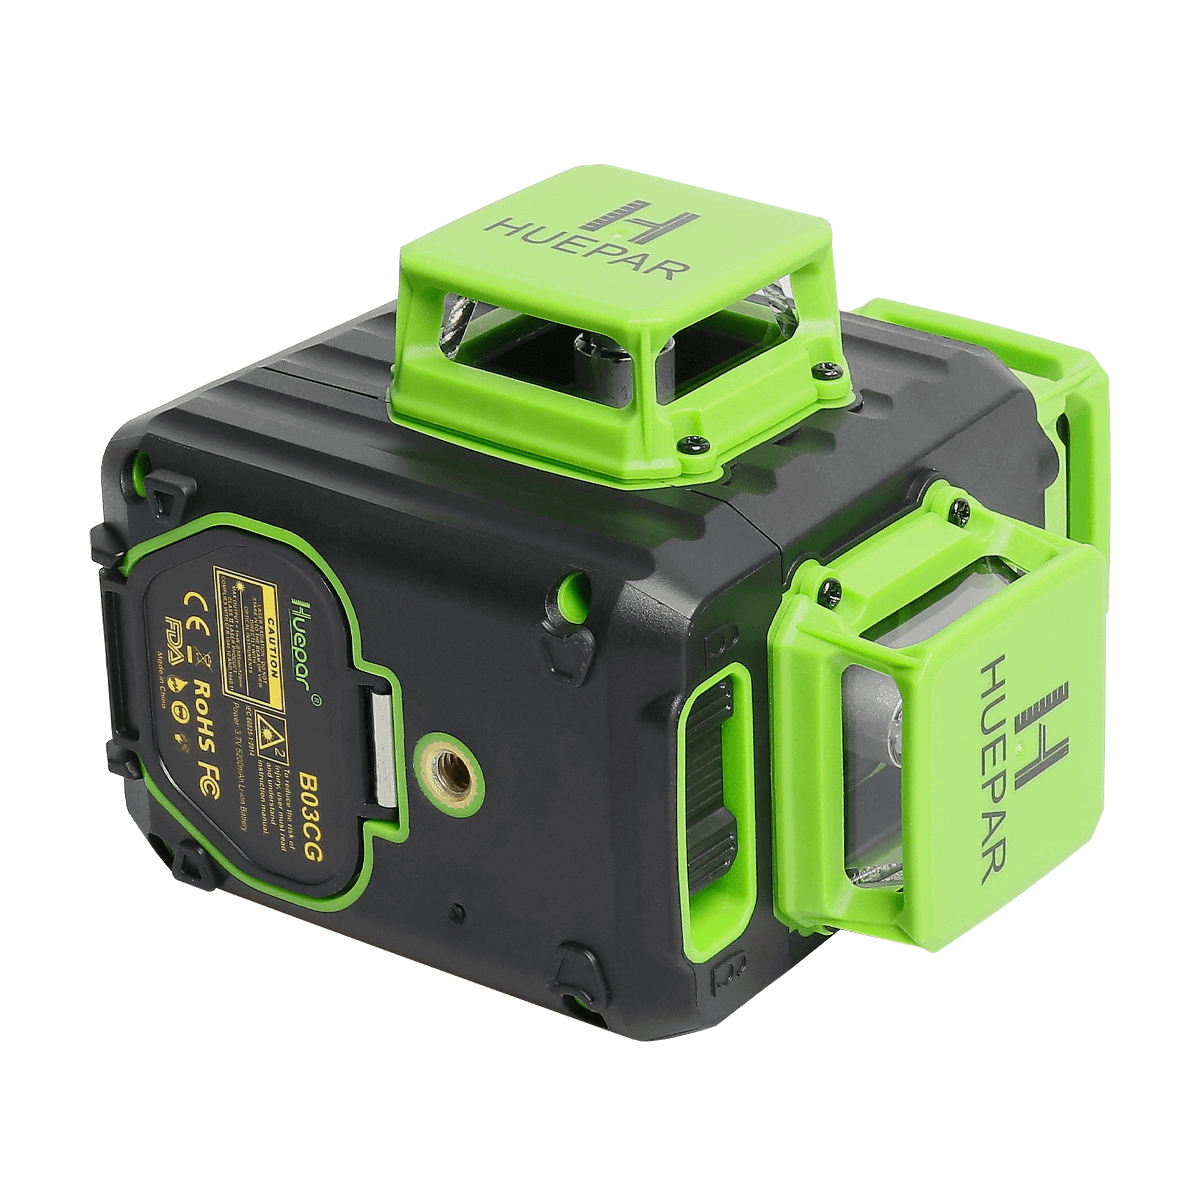 NTD! Huepar 360° green laser. Couldn't justify the big name price tags :  r/Tools